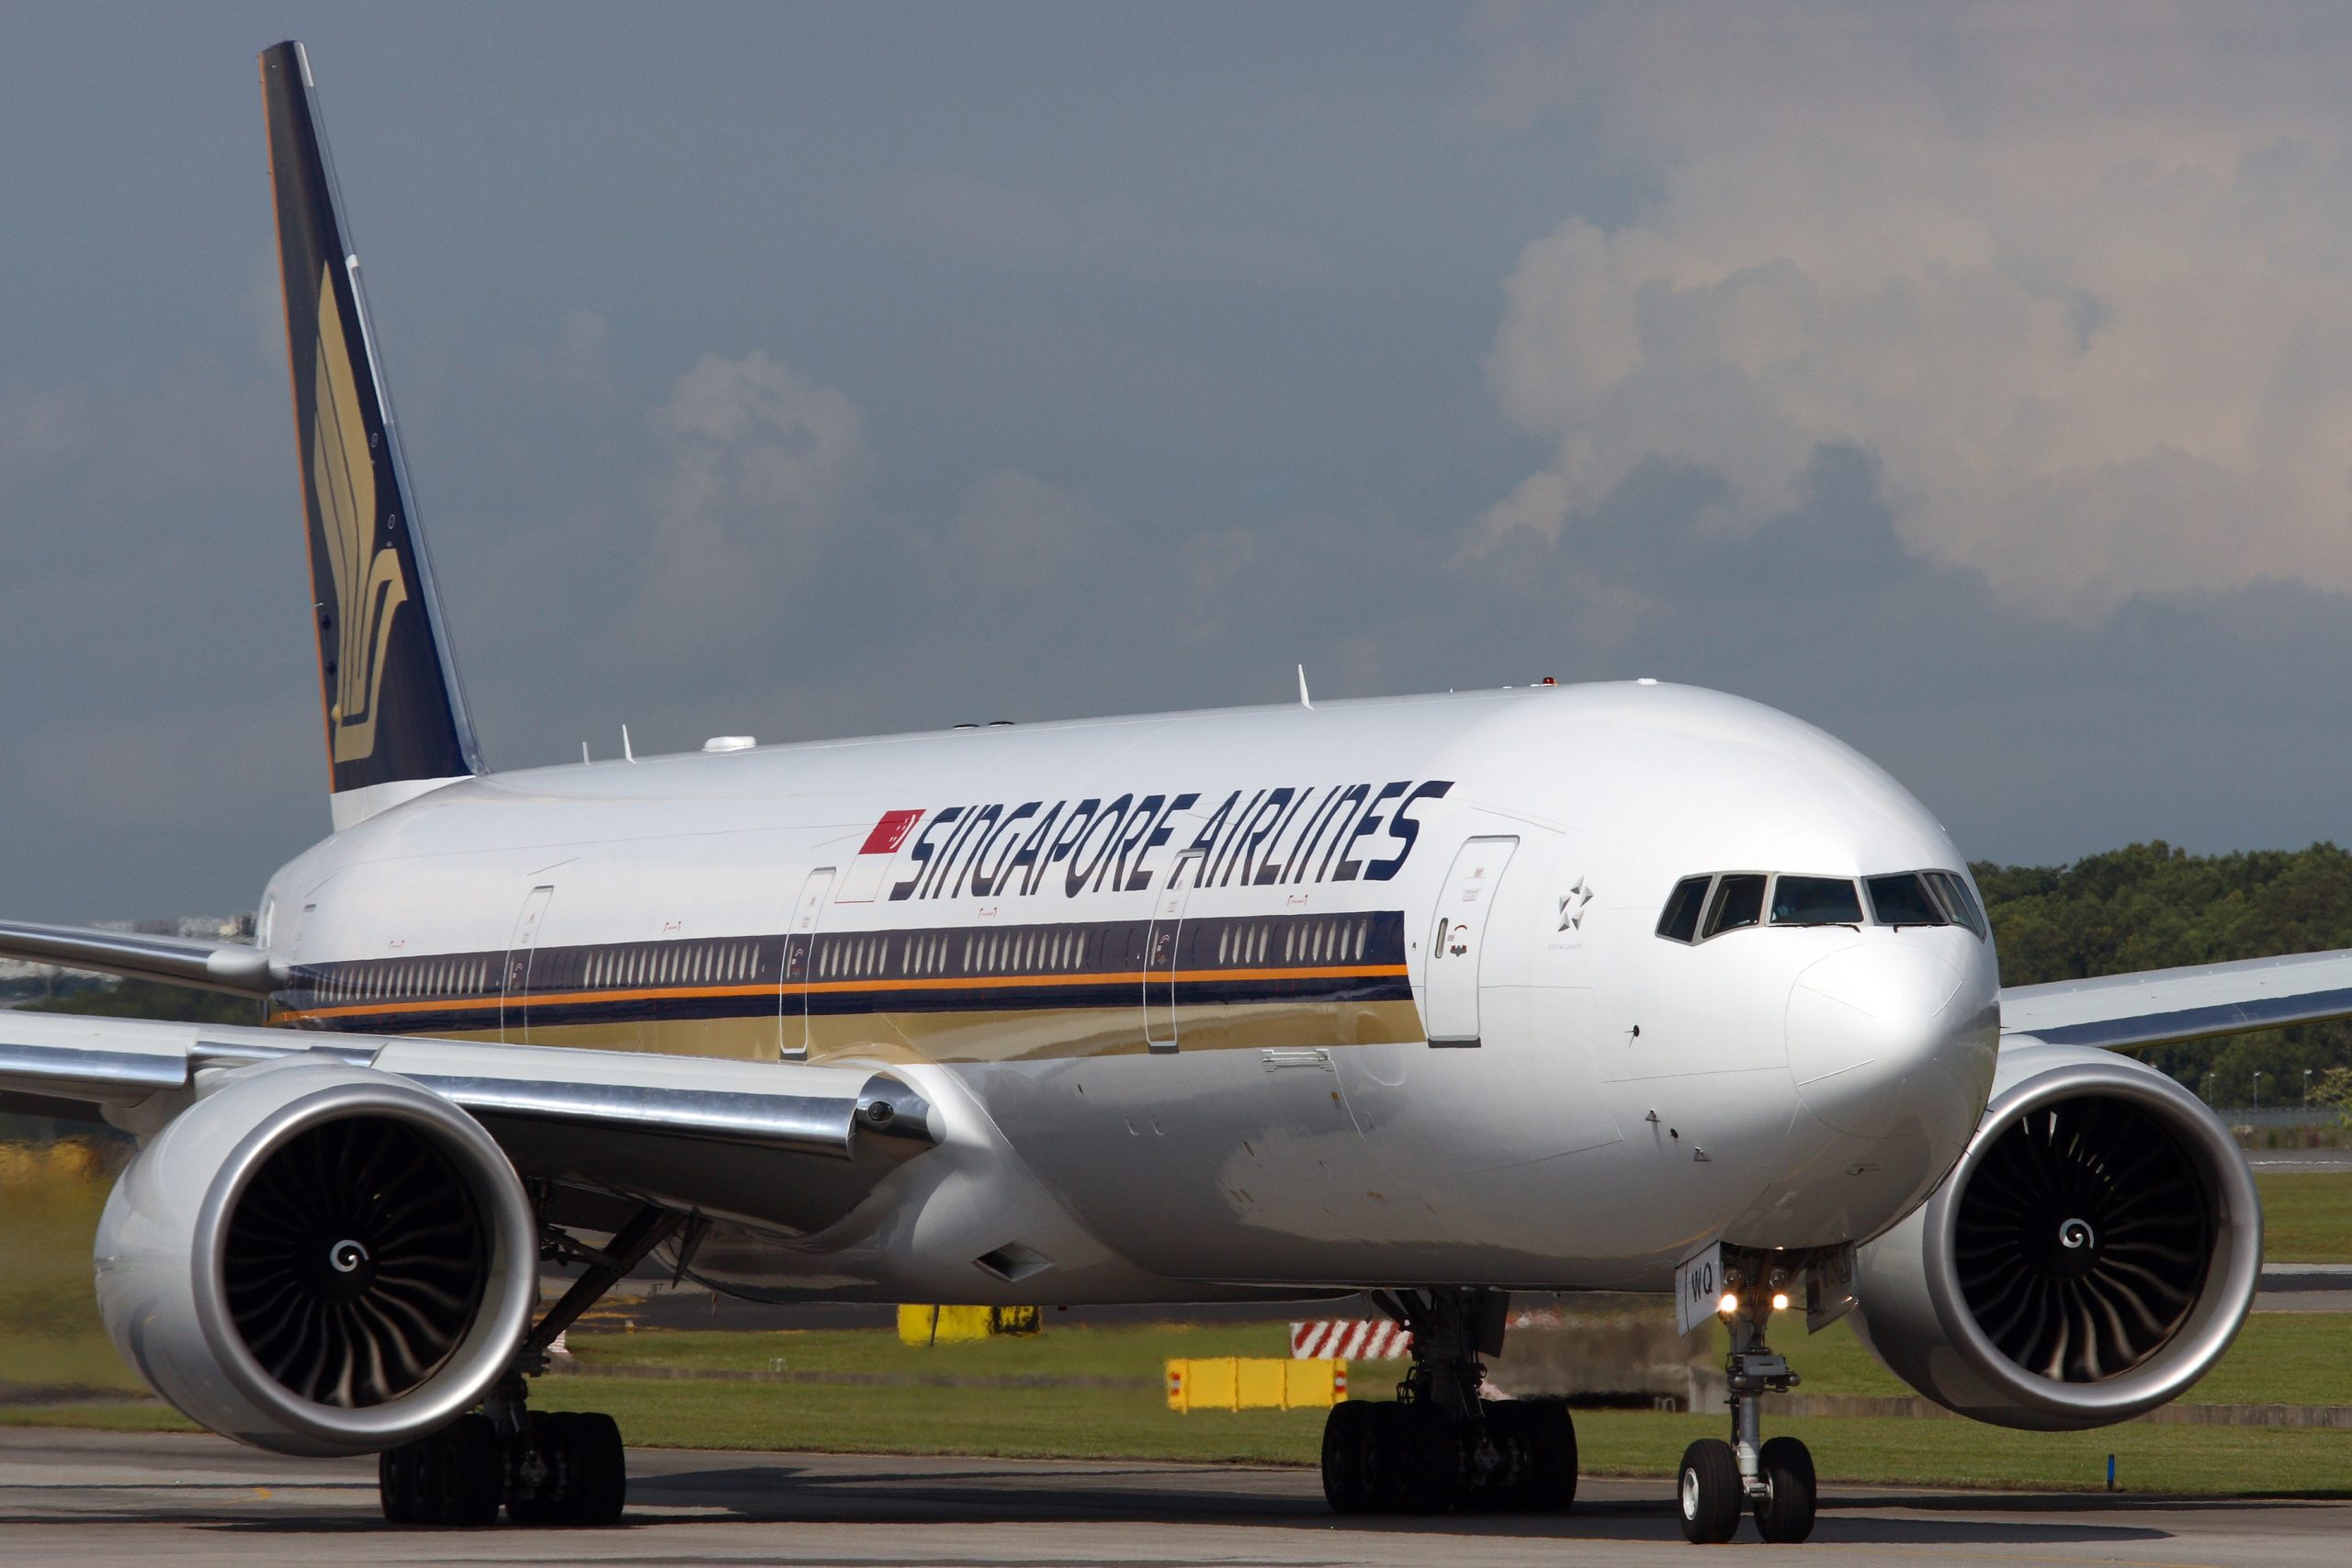 Image supplied by Singapore Airlines